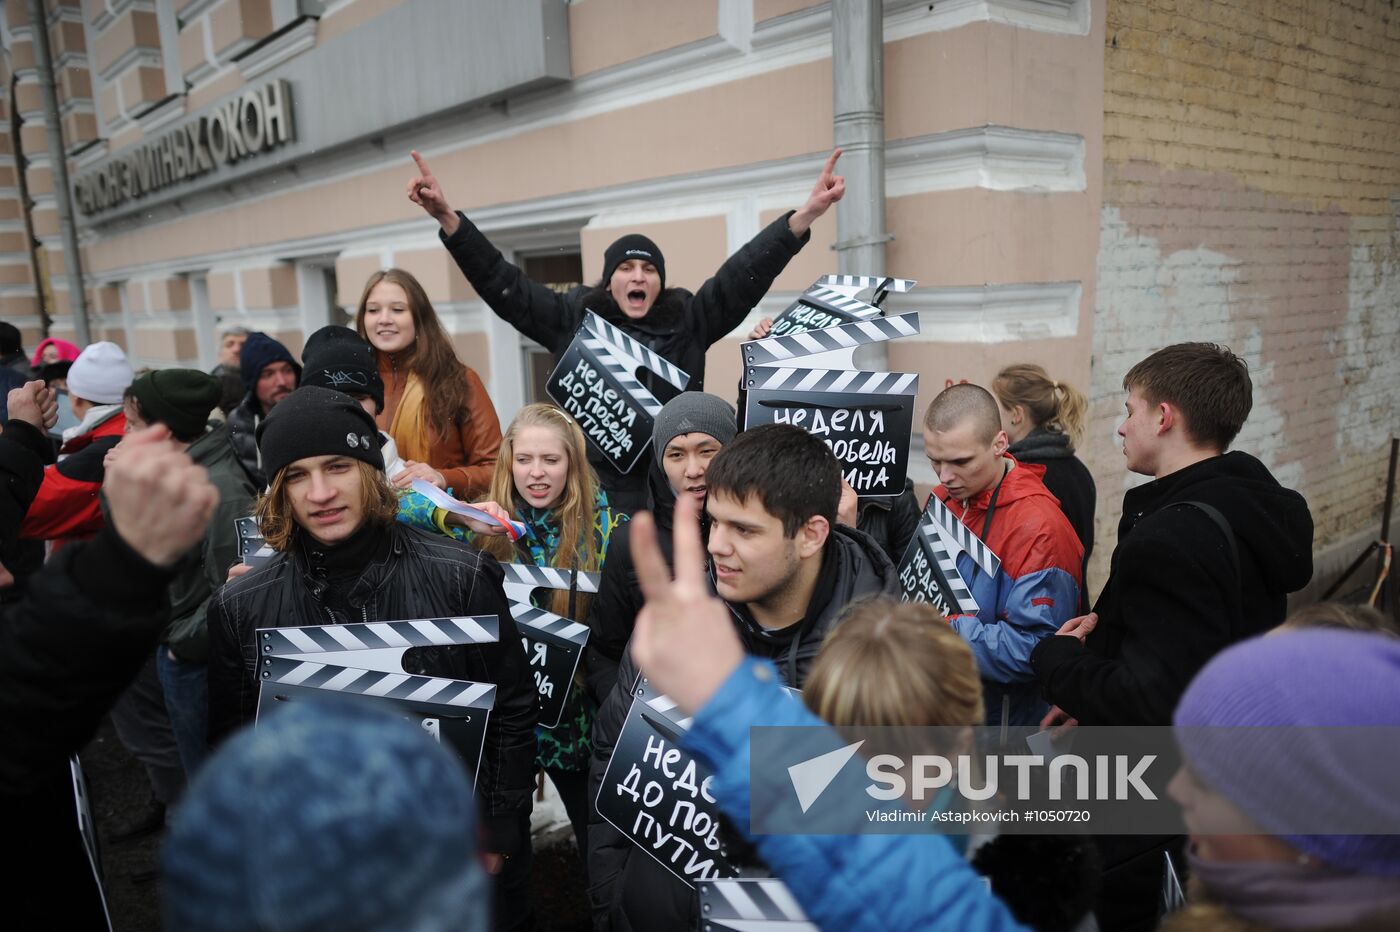 Supporters of presidential candidate Vladimir Putin